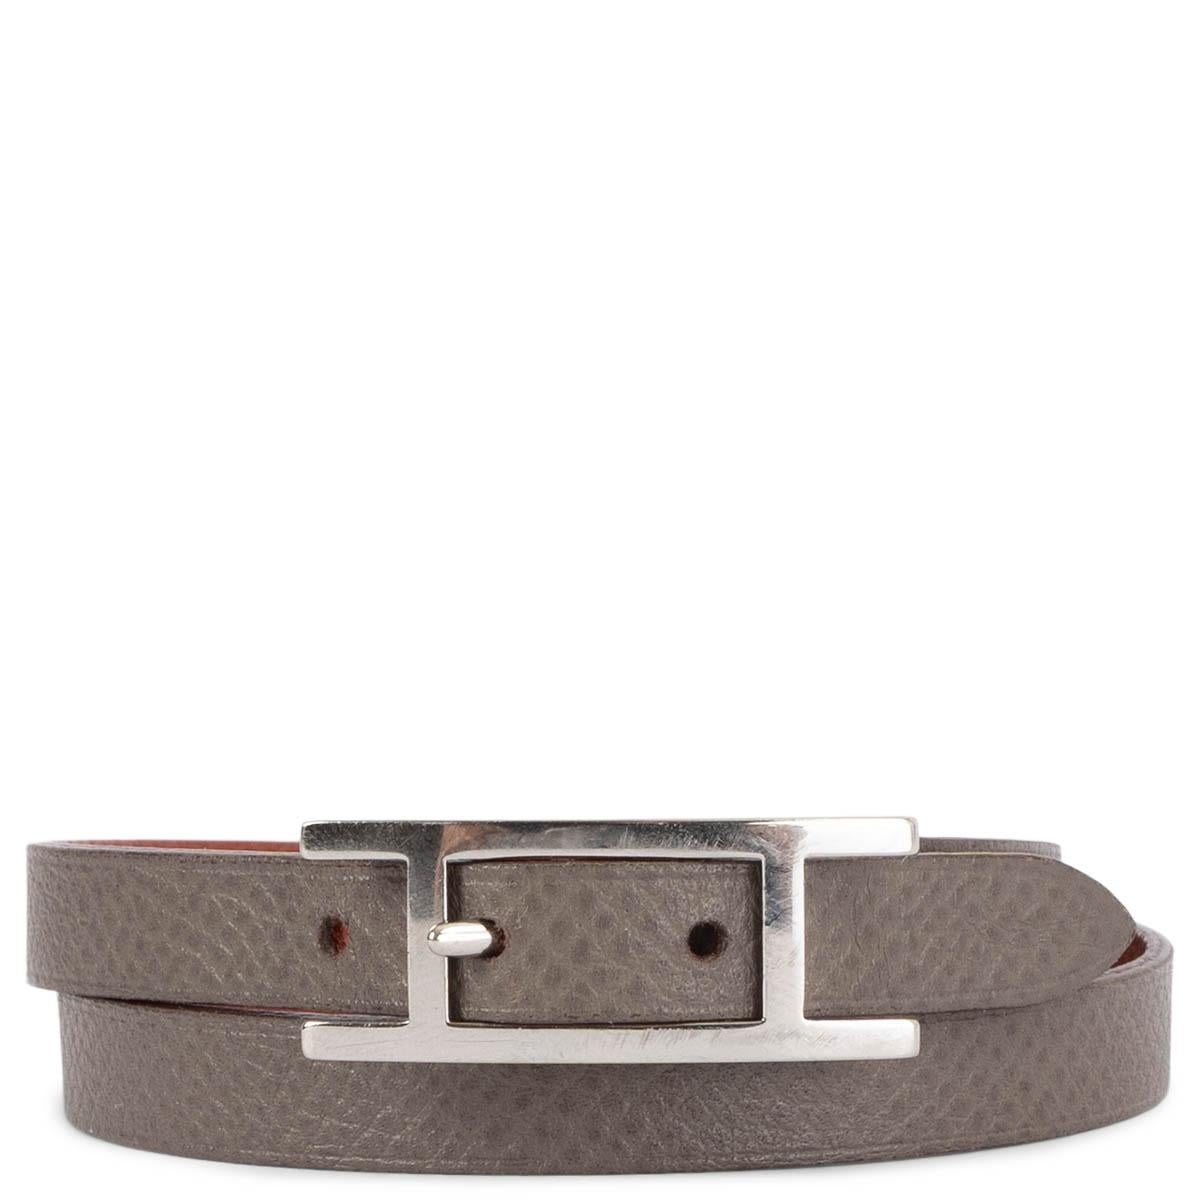 100% authentic Hermès Behapi double wrap reversible bracelet in Cuivre (brick red) and Etain (grey) Epsom leather with Palladium hardware. Has been worn and shows some scratches to the hardware. Overall in very good condition. 

Measurements
Tag